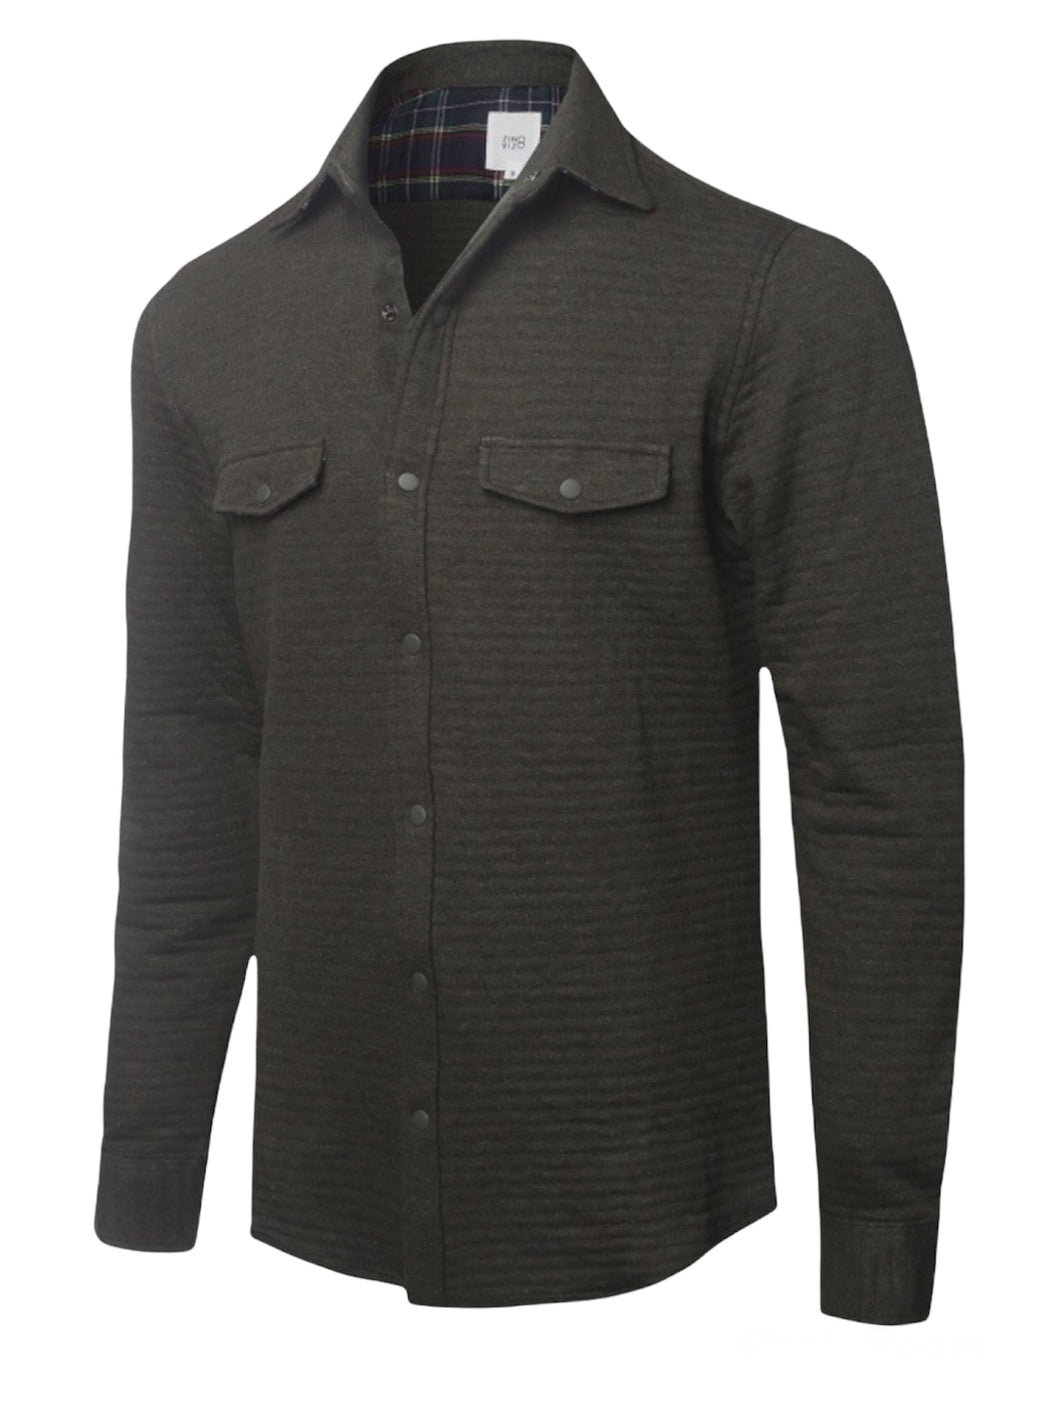 Super Soft Quilted Long Sleeve Snap Button Shirts- Olive